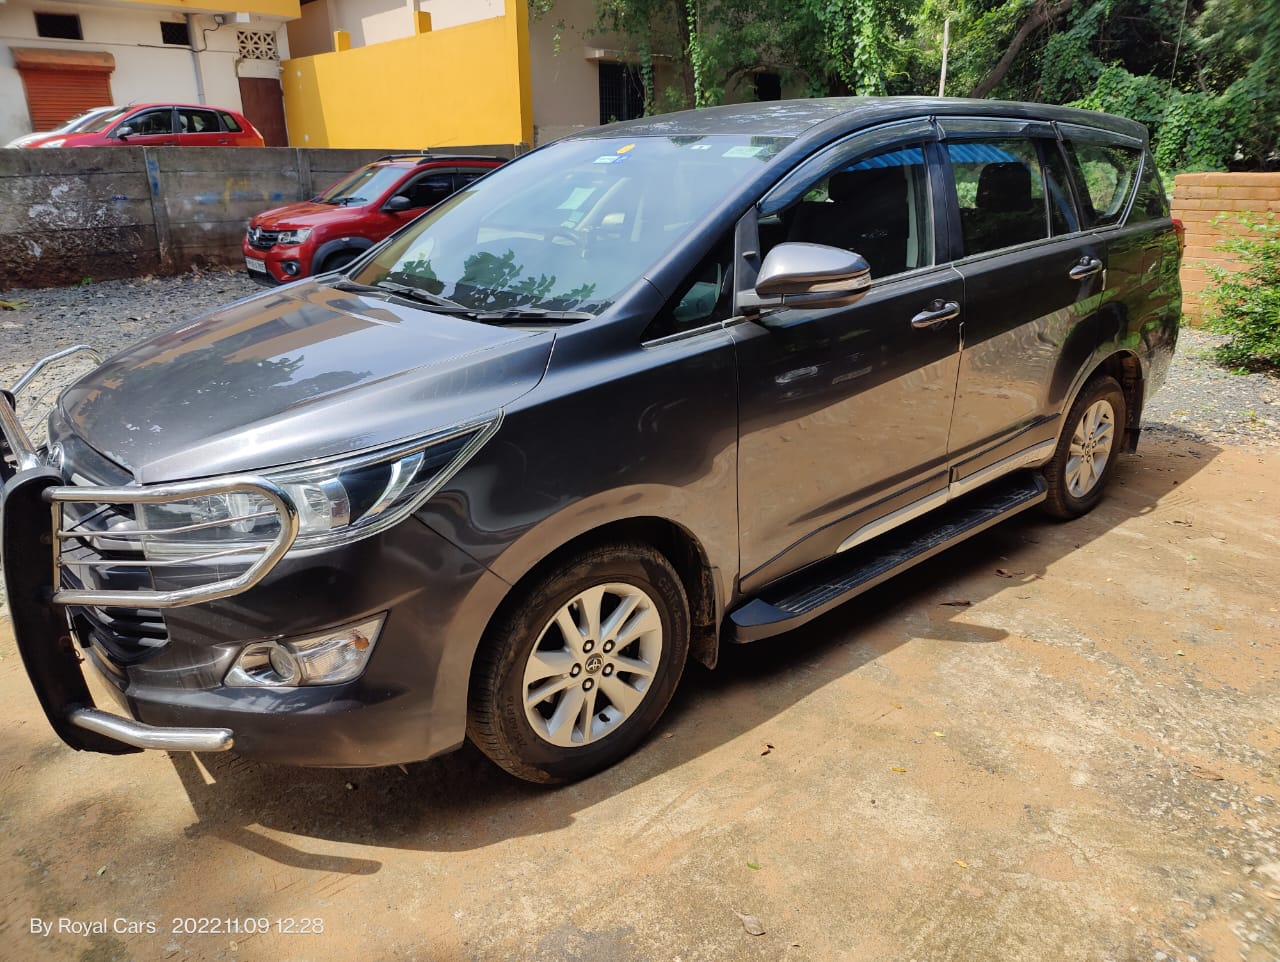 5096-for-sale-Toyota-Innova-Crysta-Diesel-Second-Owner-2017-PY-registered-rs-1599999